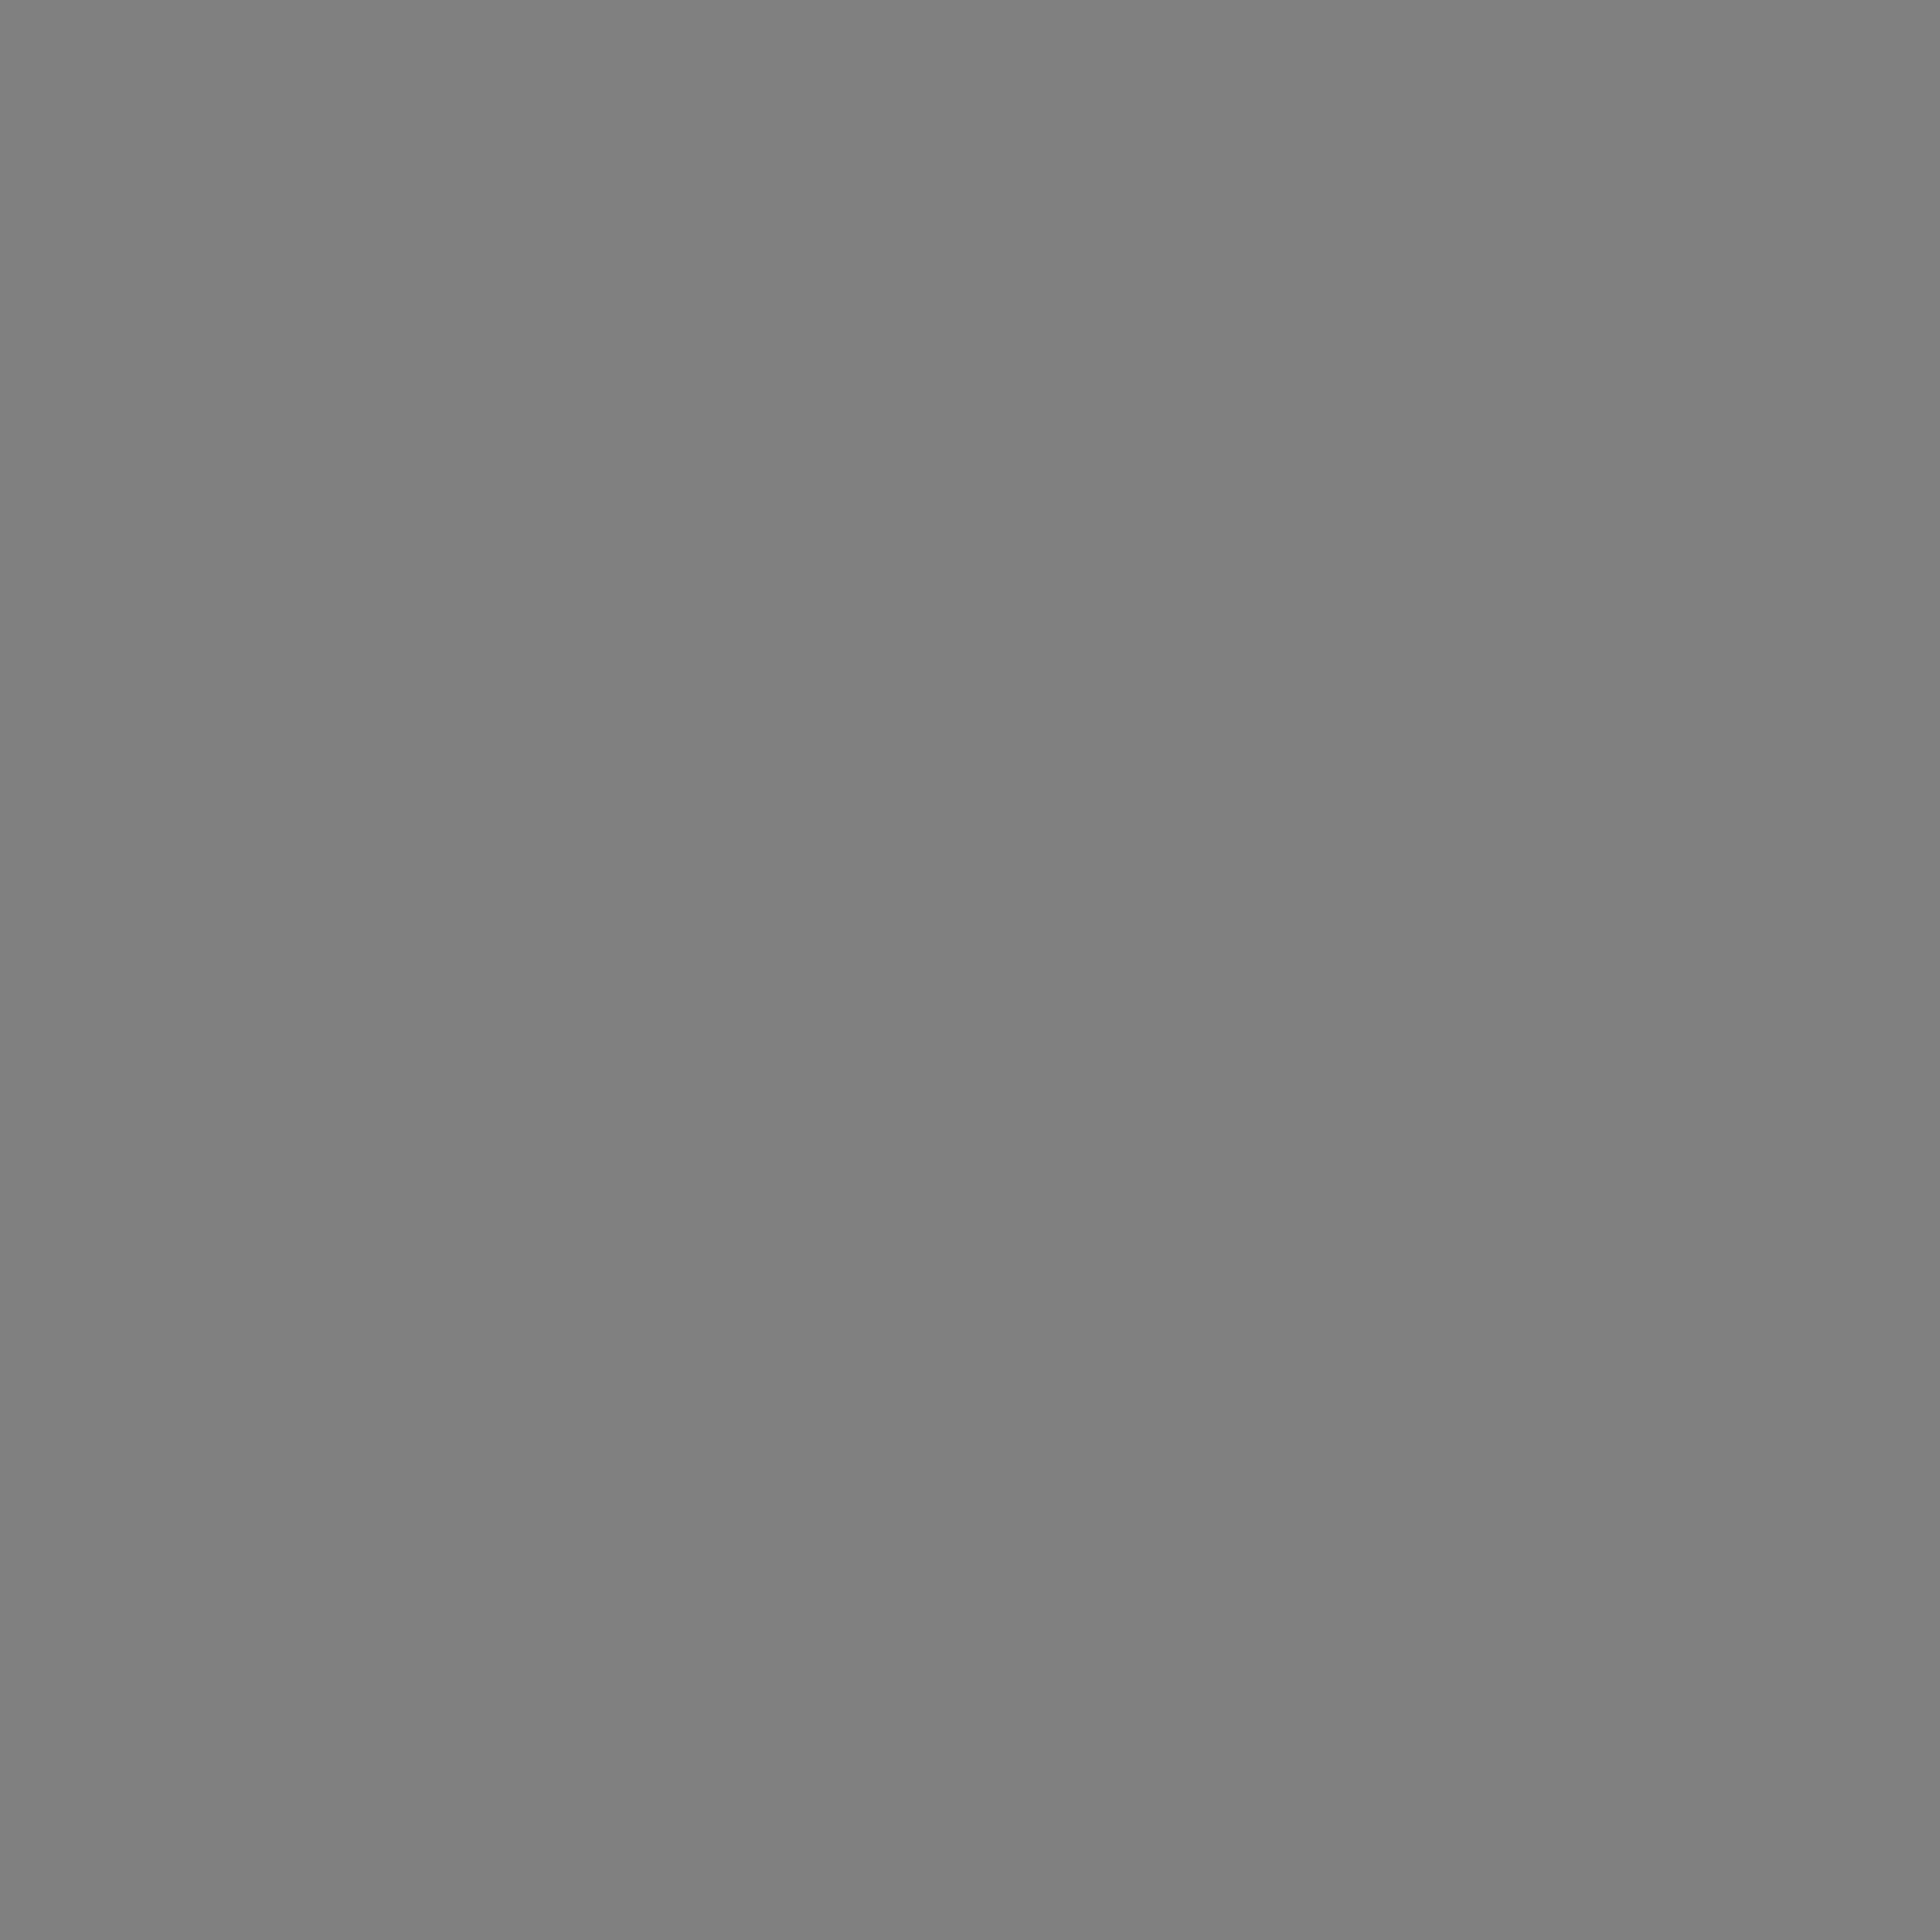 3600x3600 Gray Solid Color Background